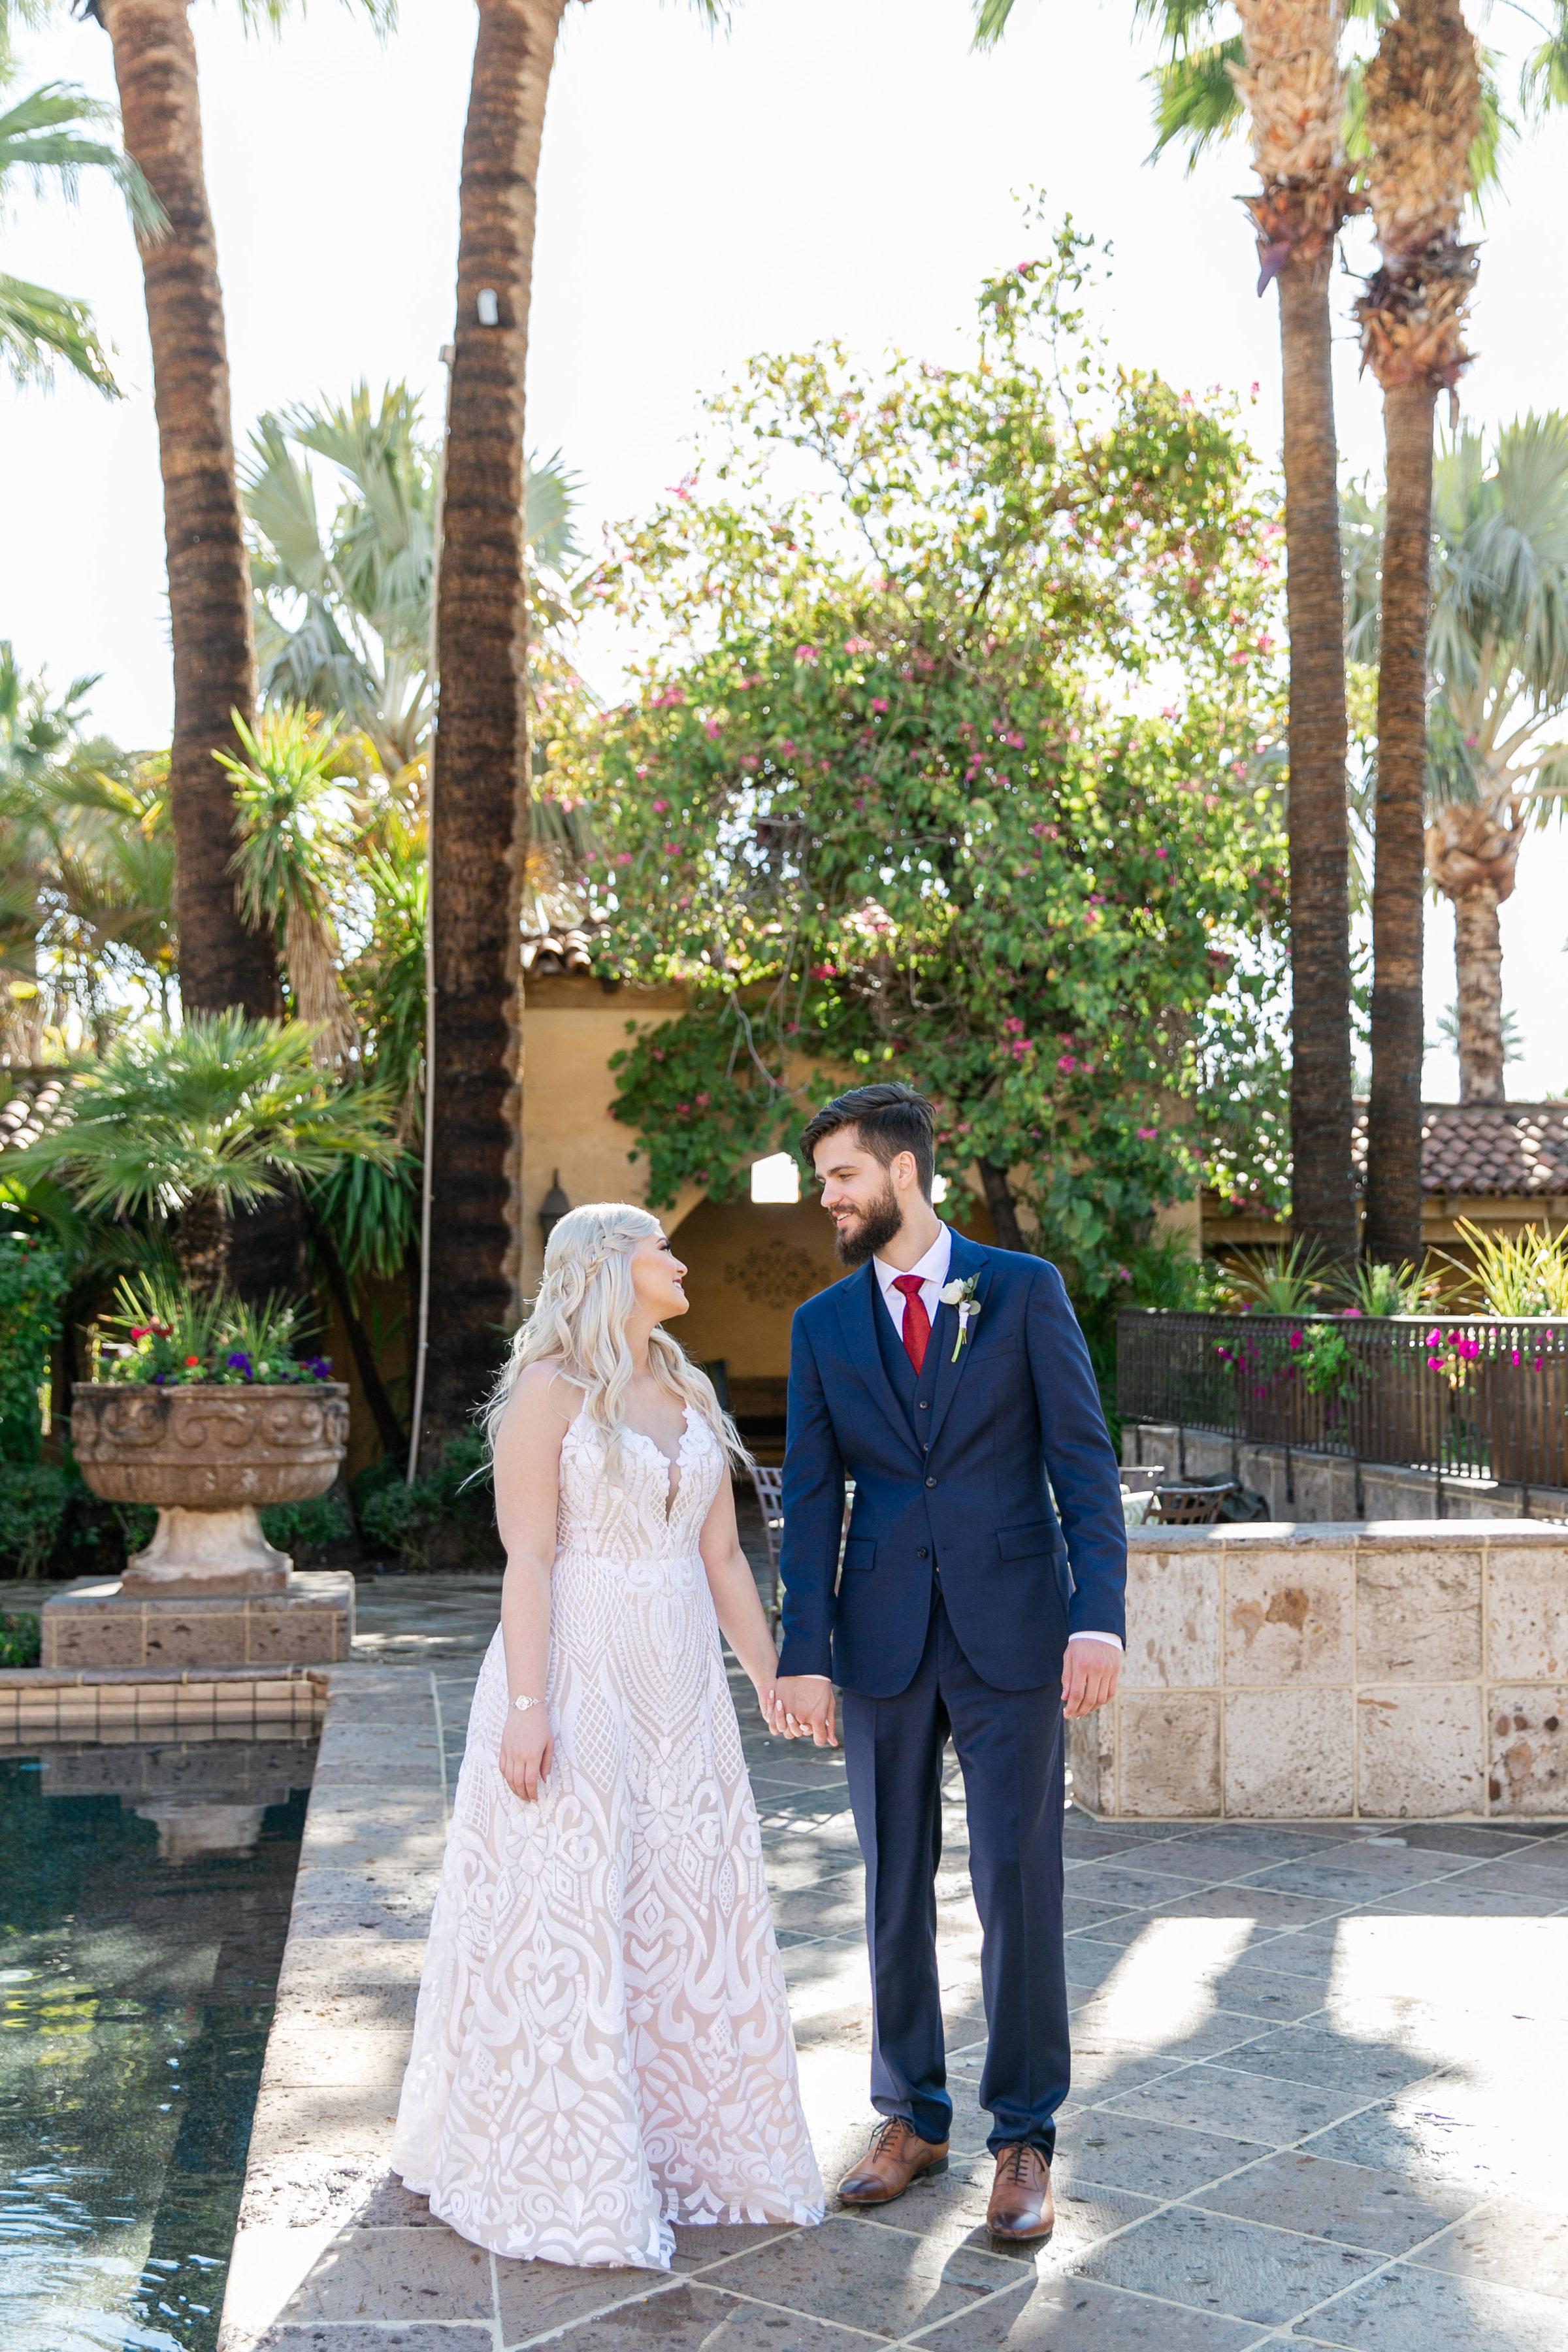 Karlie Colleen Photography - The Royal Palms Wedding - Some Like It Classic - Alex & Sam-136